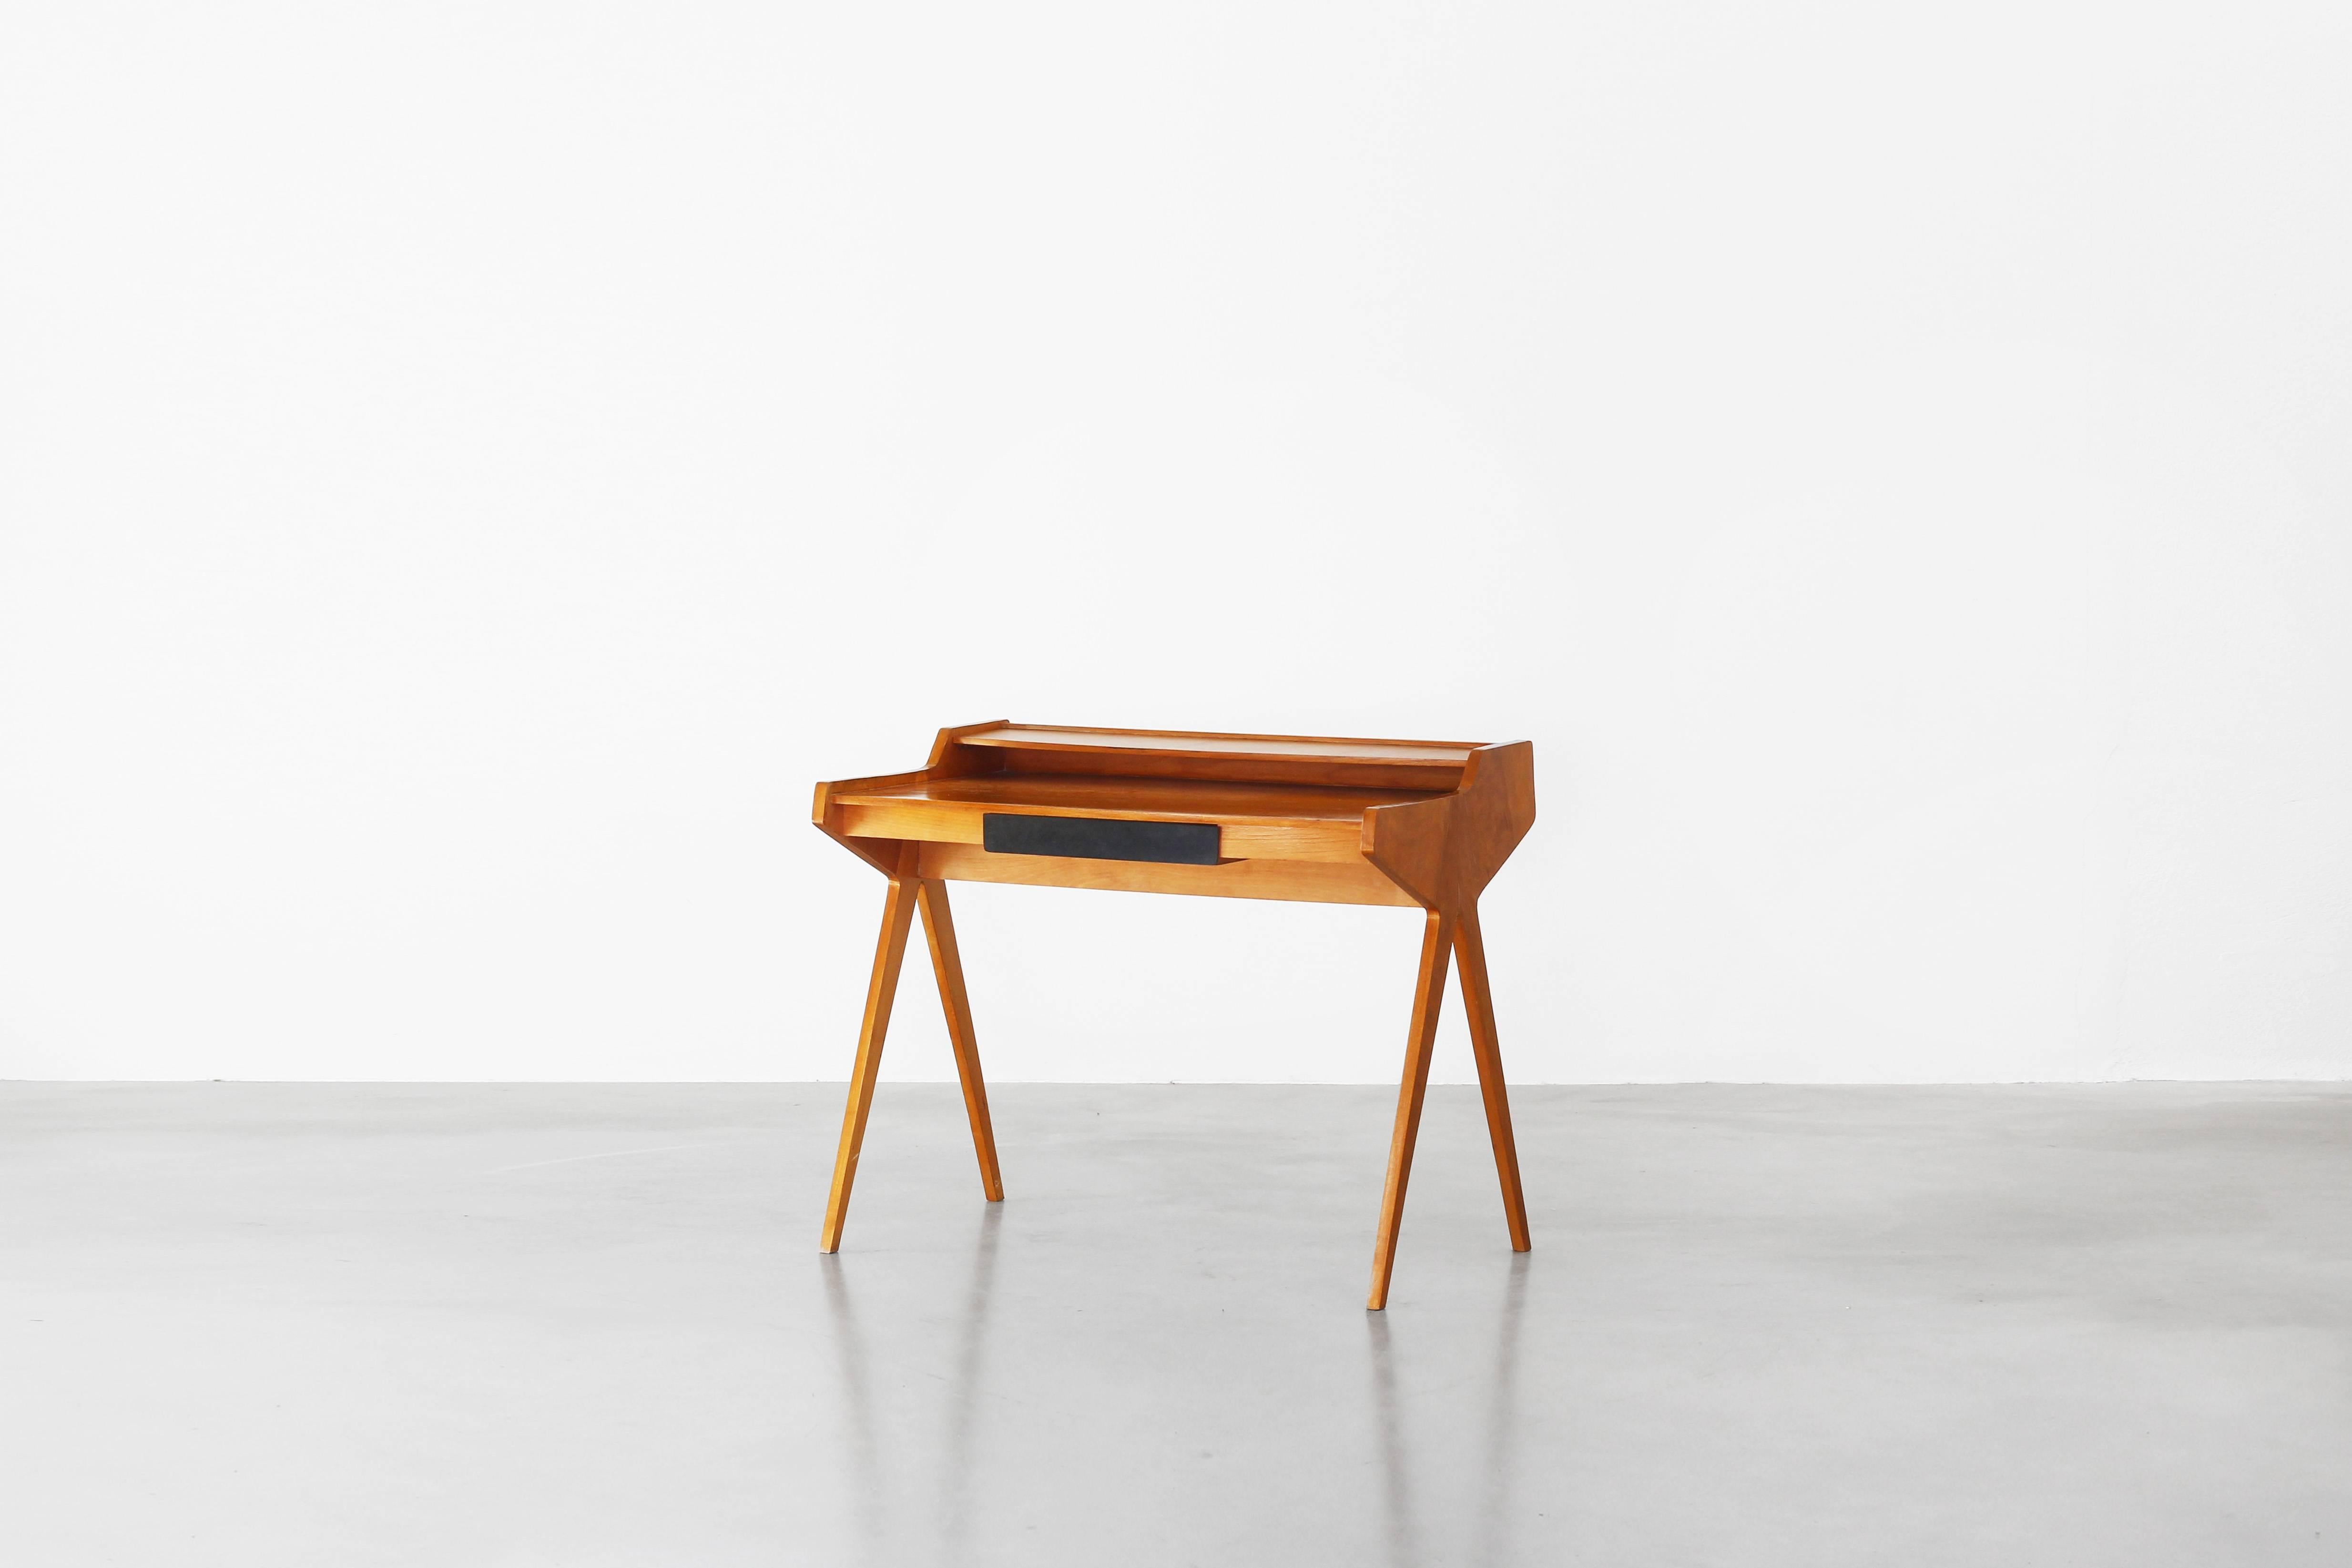 Very beautiful desk designed by Helmut Magg for WK Möbel, Germany 1955.
The desk is made of nutwood and is still in a very good condition with signs of use.